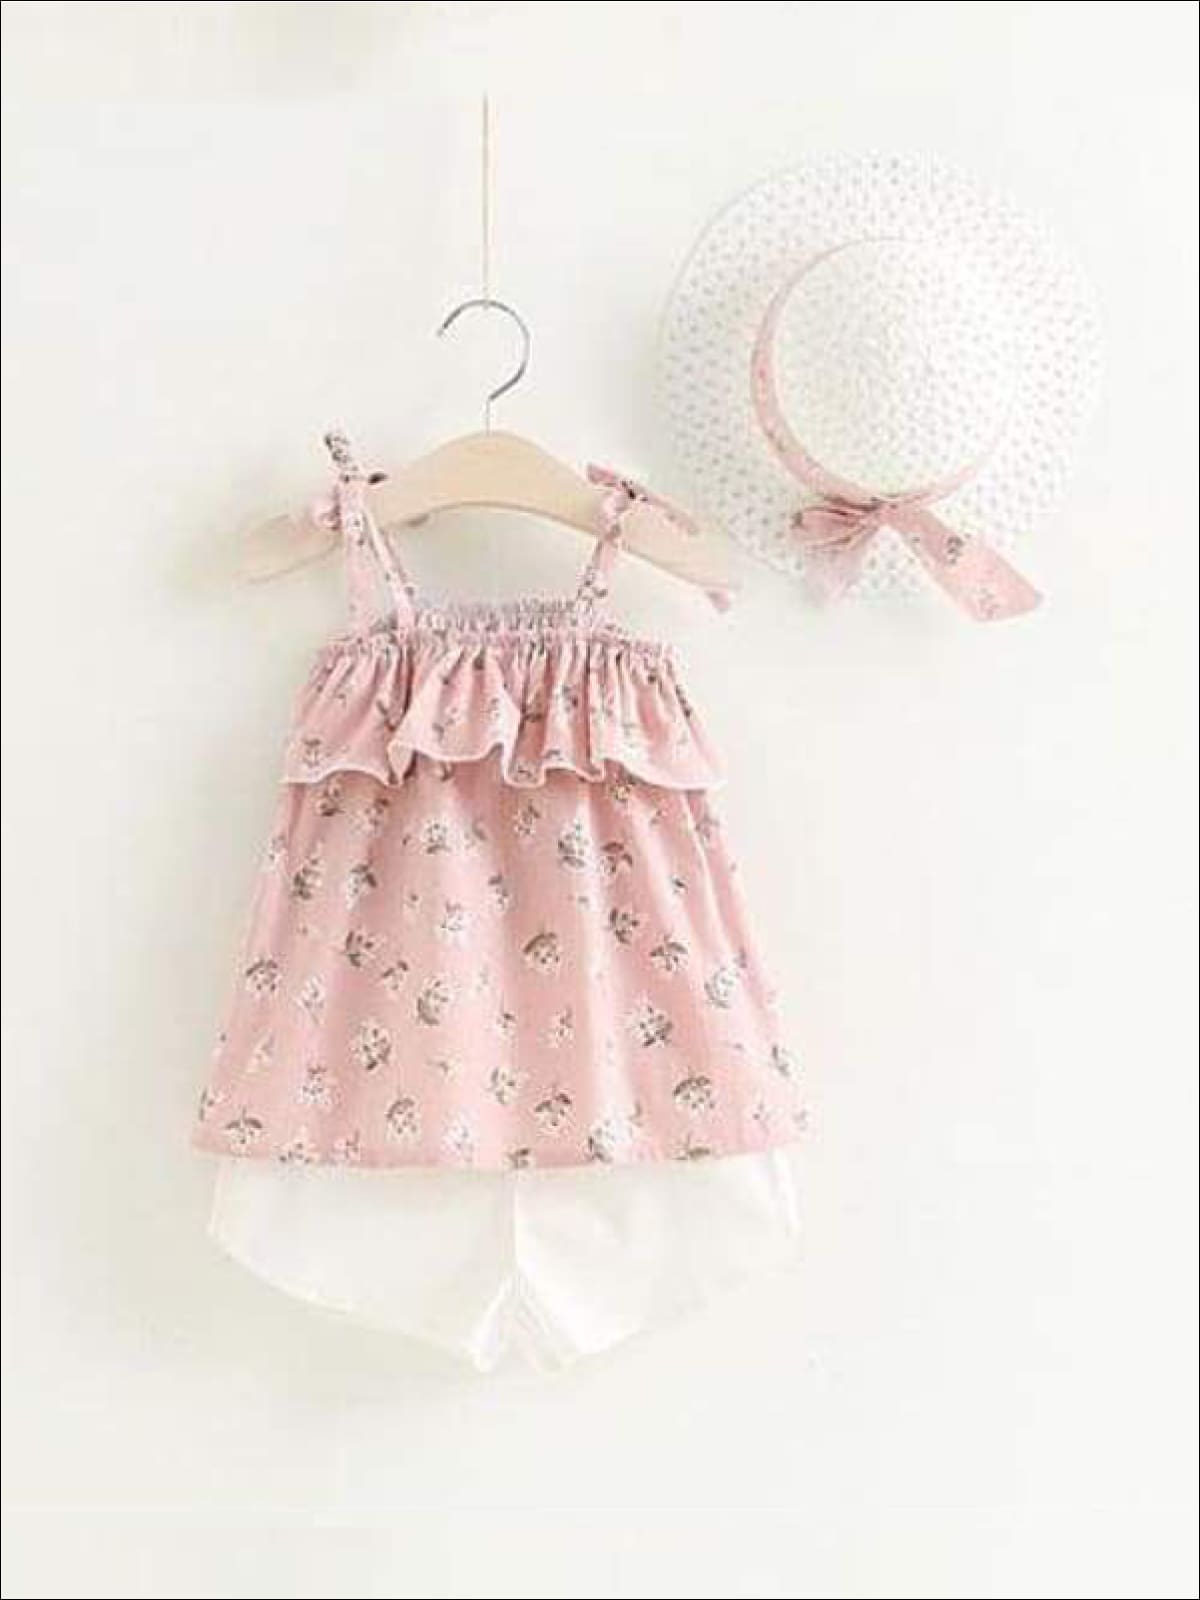 Girls Sleeveless Floral Print Tunic & White Shorts Set with Matching Sun Hat - Pink / 2T - Casual Spring Set